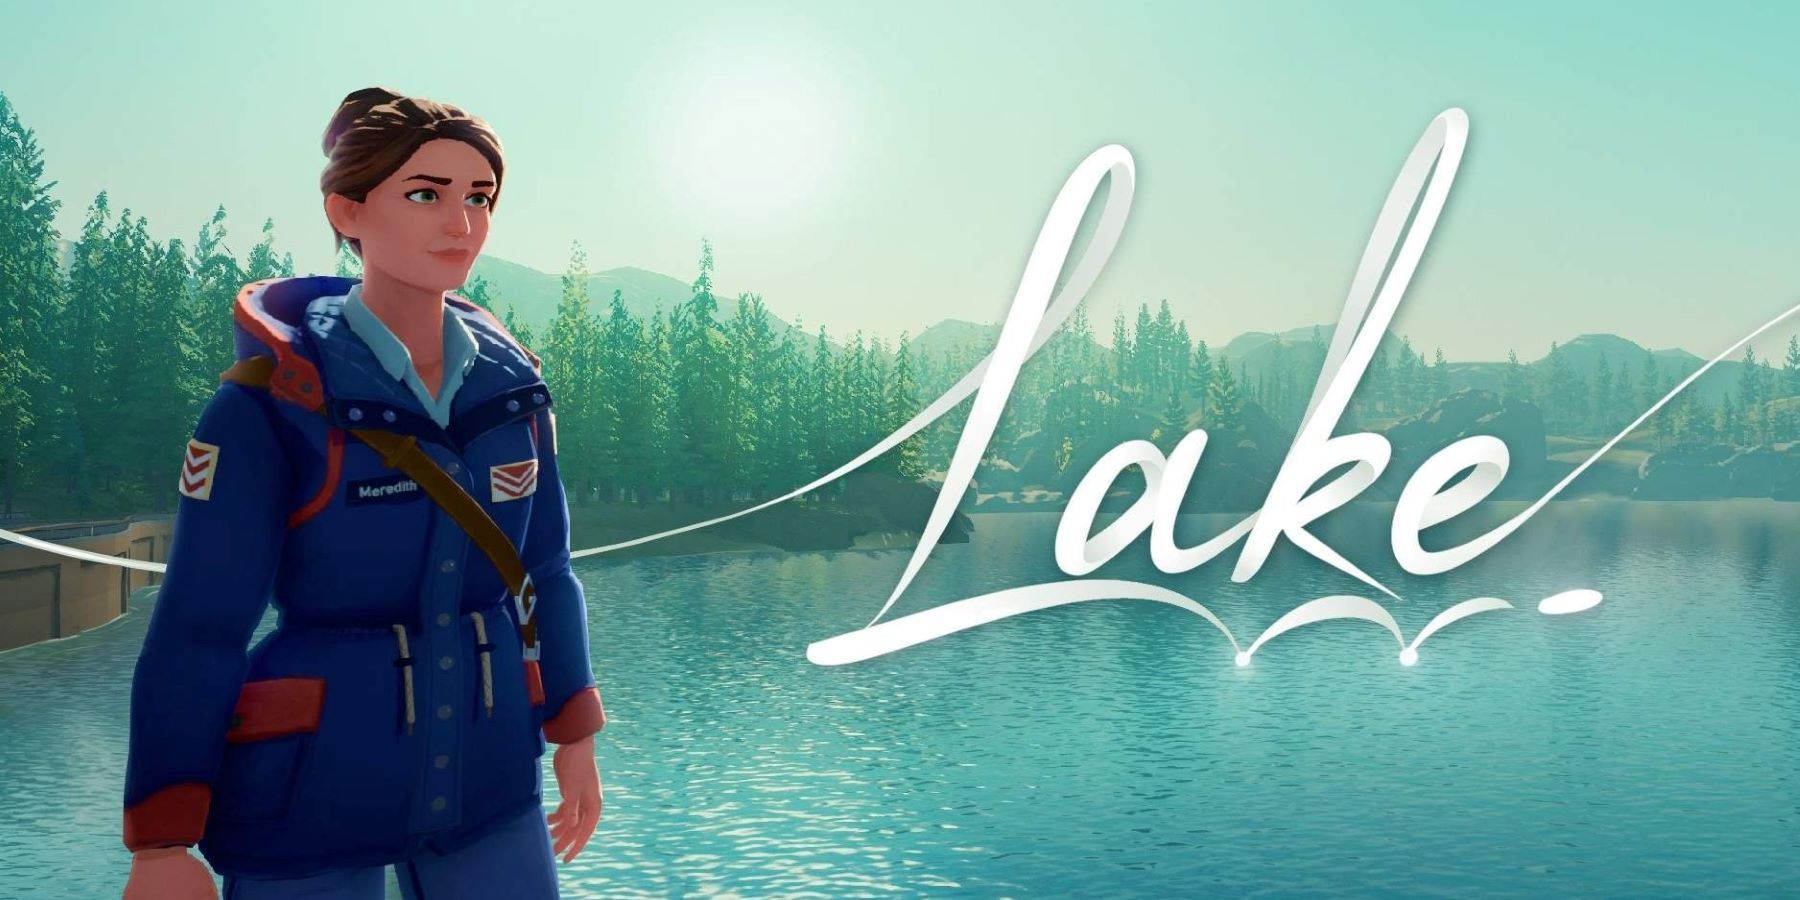 Meredith Weiss with the Lake logo